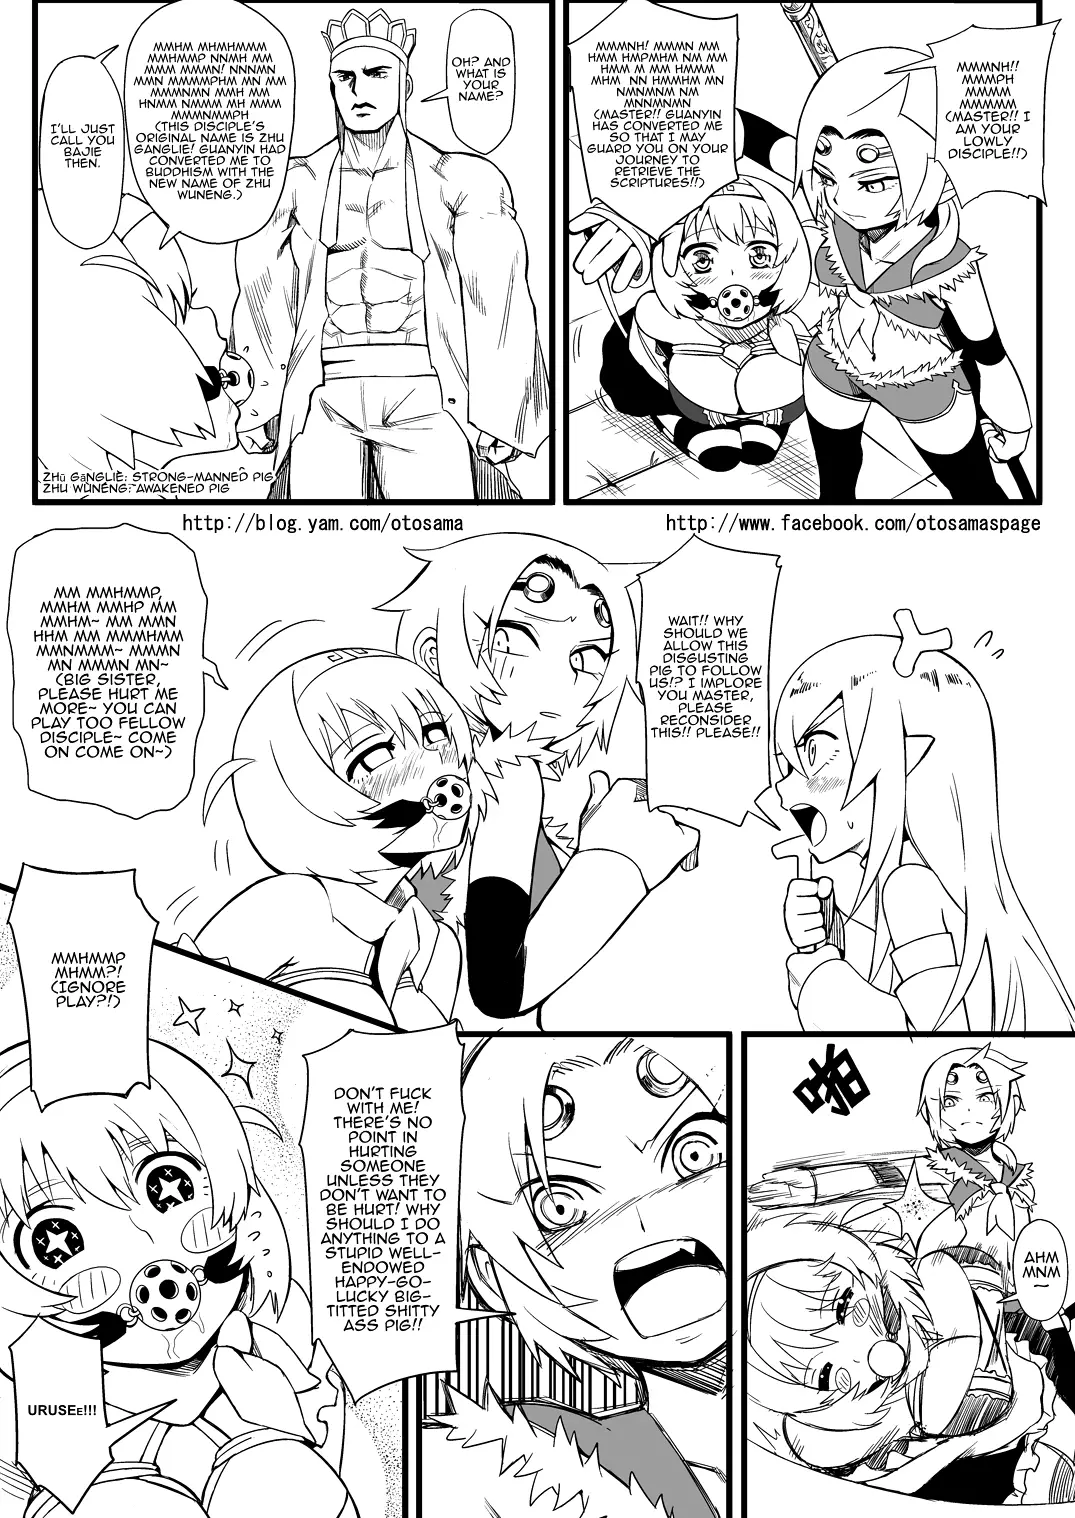 Tang Hill Burial - Journey To The West Irresponsible Anything Goes Edition - 4 page 7